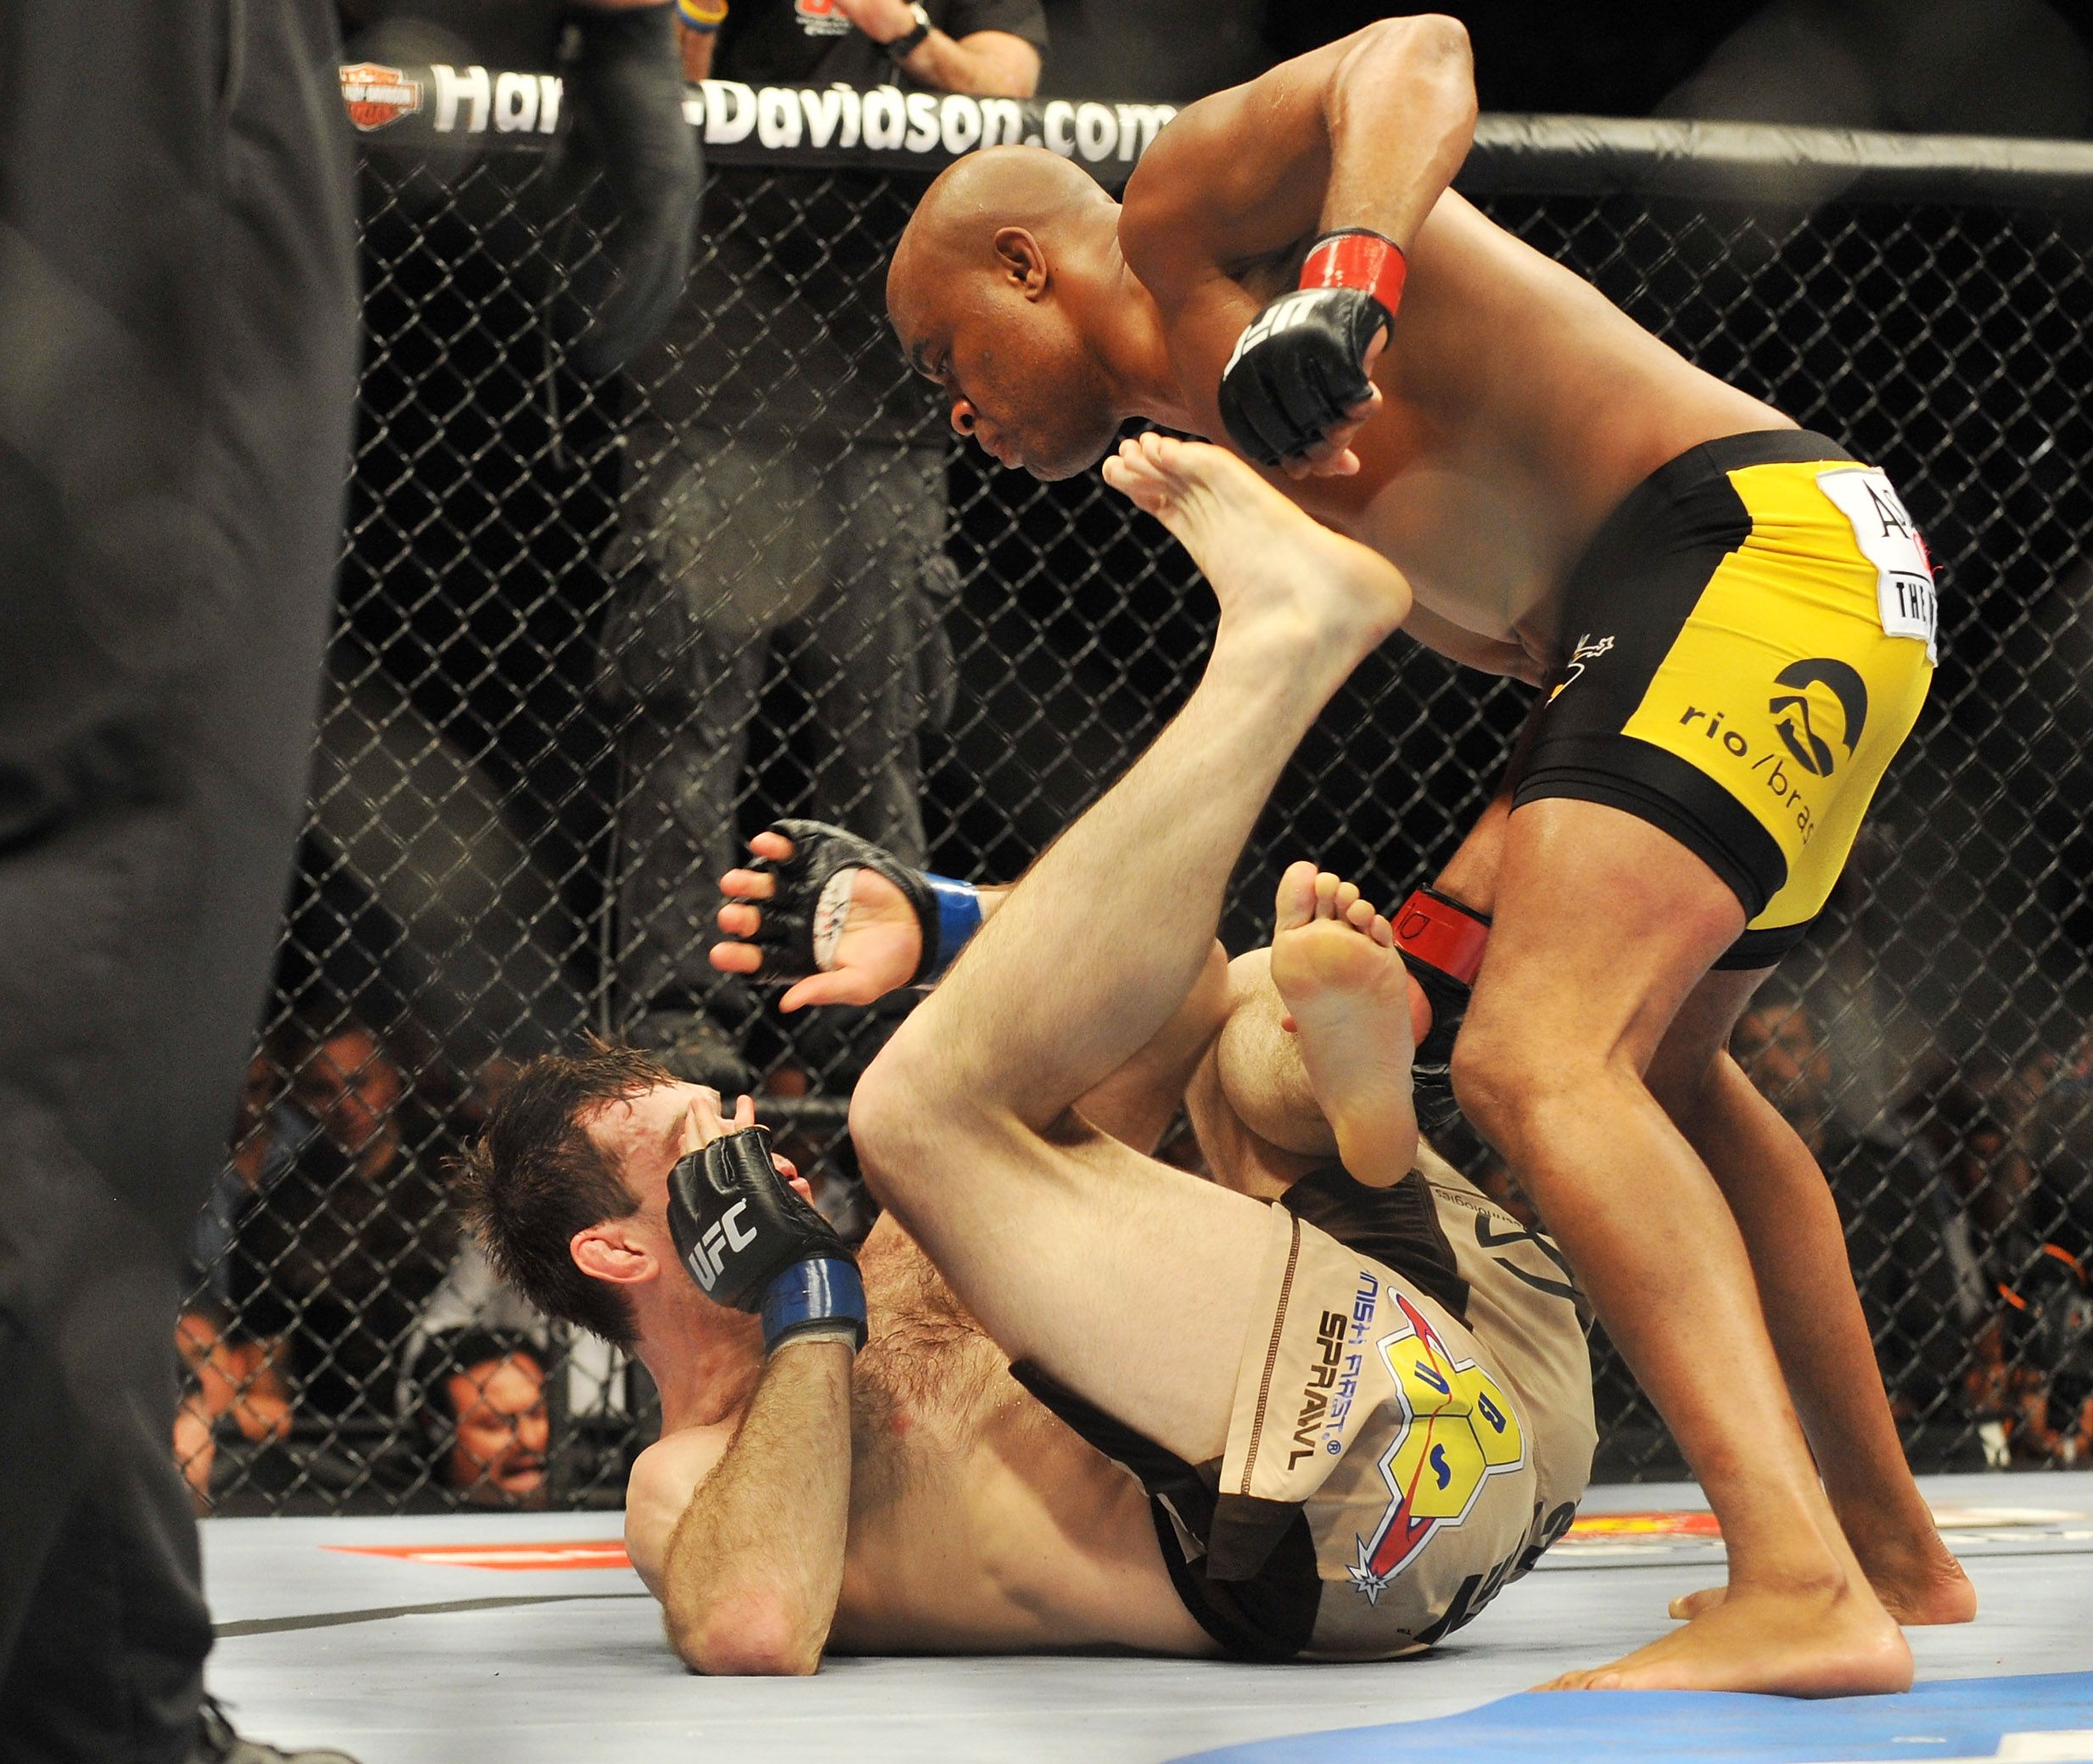 Anderson's Silva's most devastating knockouts